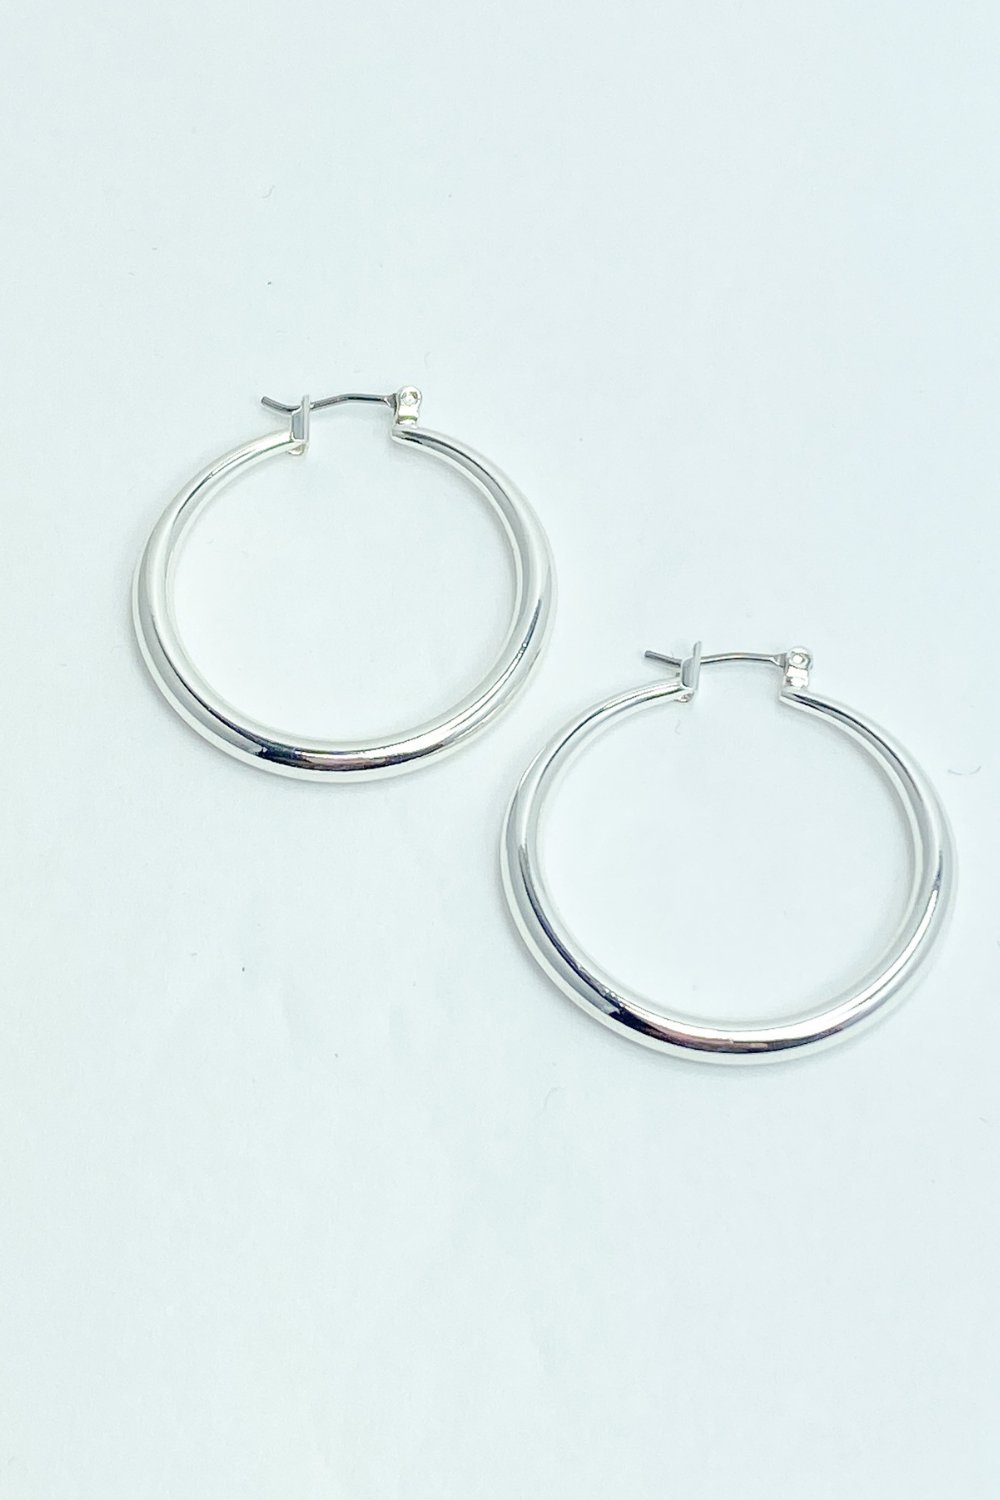 Small Round Silver Hoop Earrings - Lucy Doo